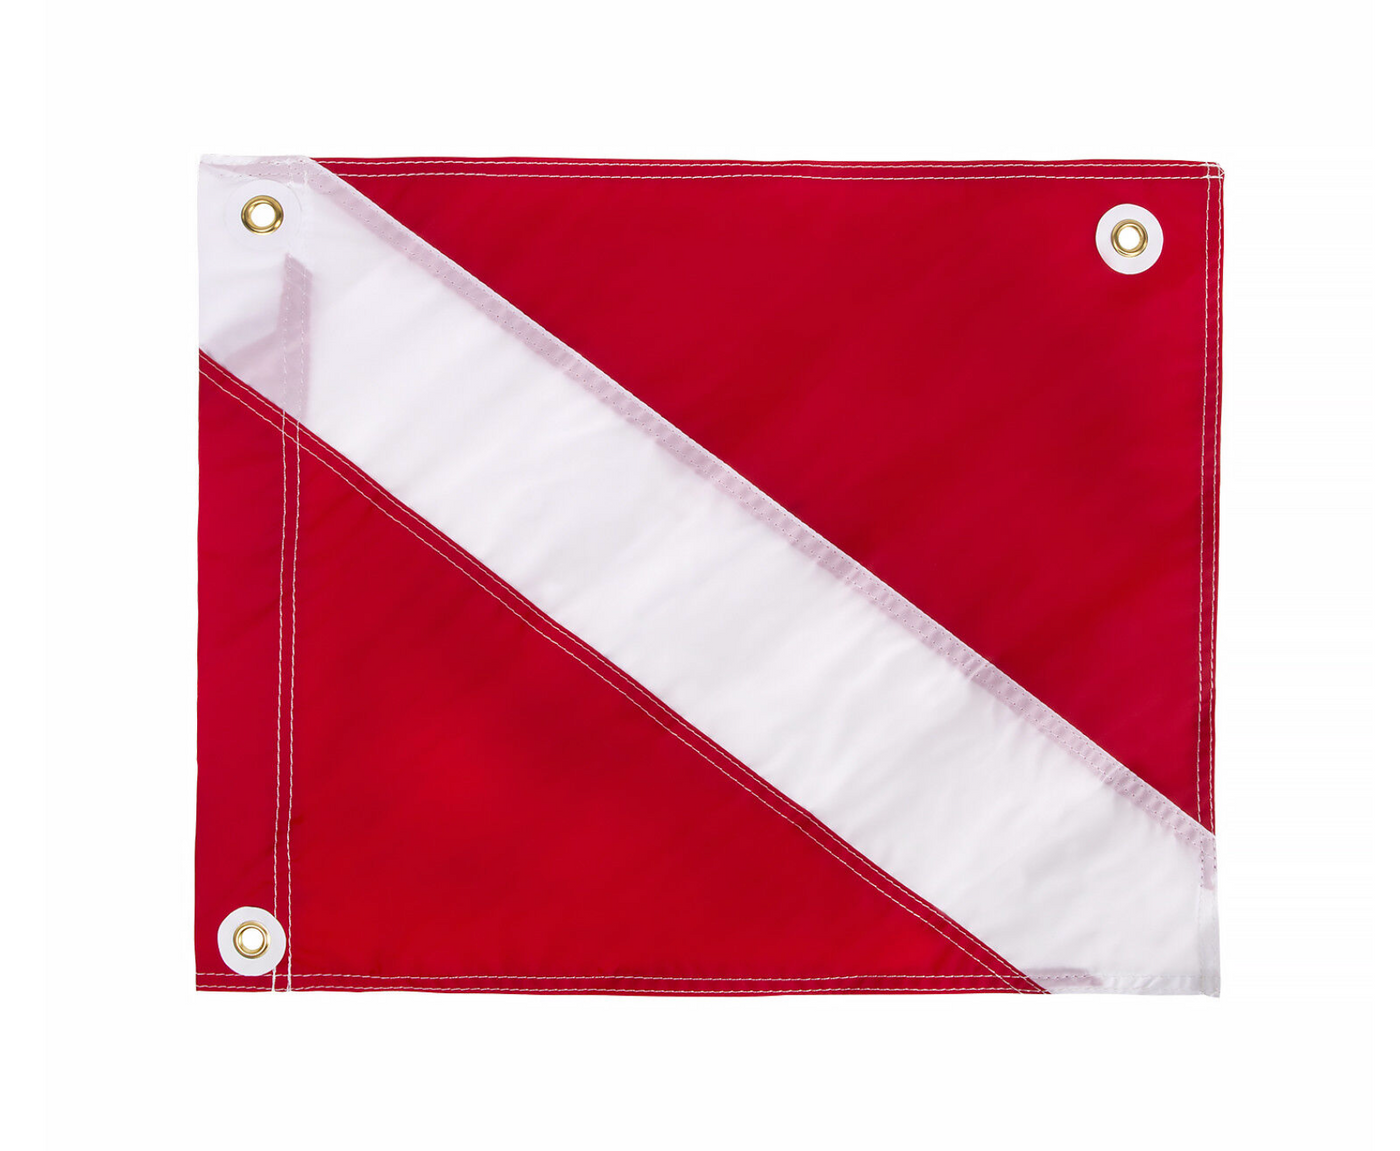 14in x 18in NYLON DIVER-DOWN FLAG WITH METAL GROMMETS